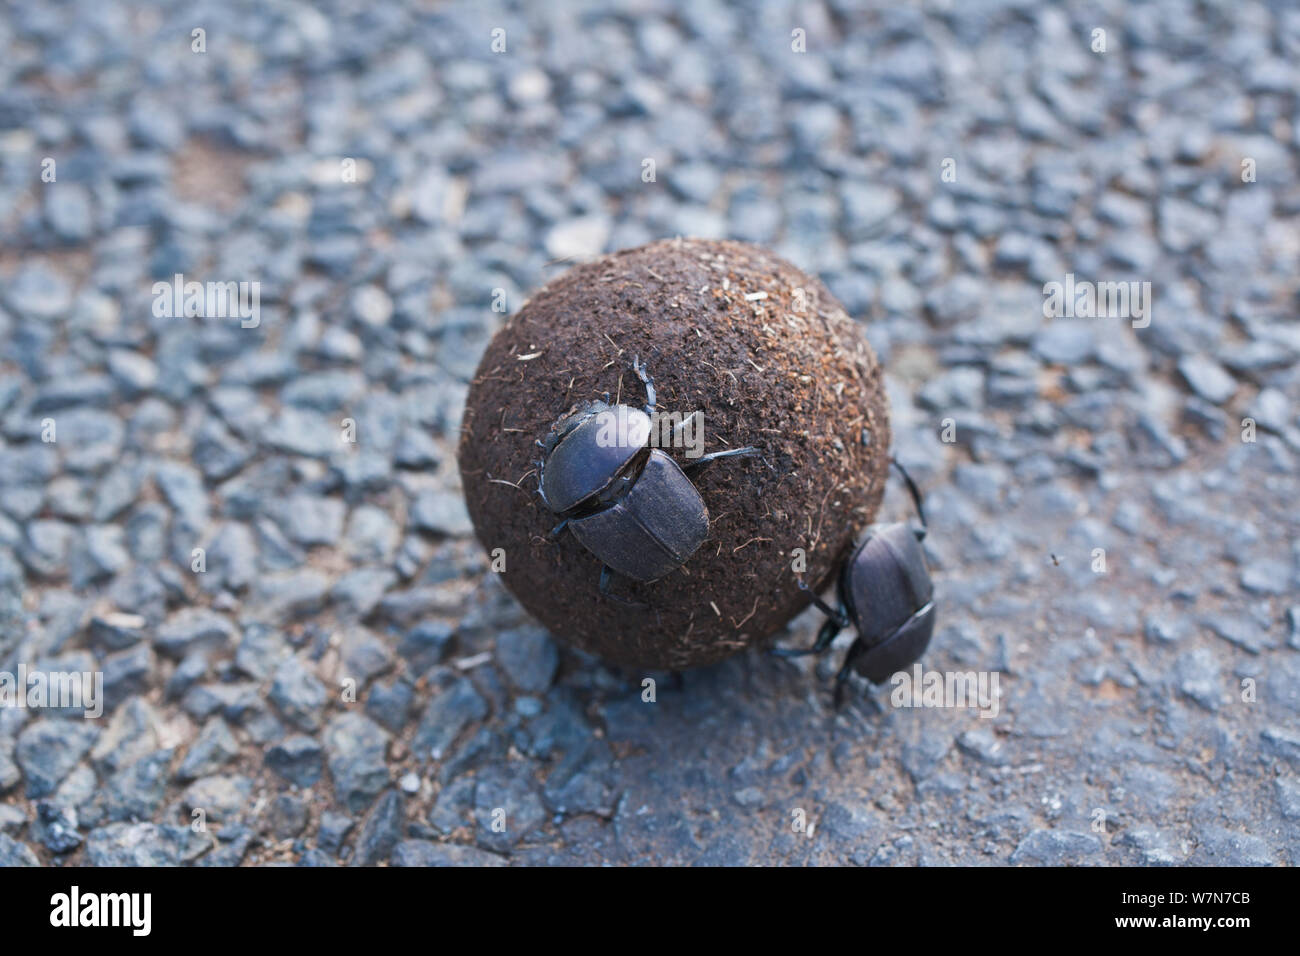 Dung Beetles (Scarabaeus aeratus) rolling a ball of dung. Umfolozi-Hluhluwe National Park, South Africa, October. Stock Photo